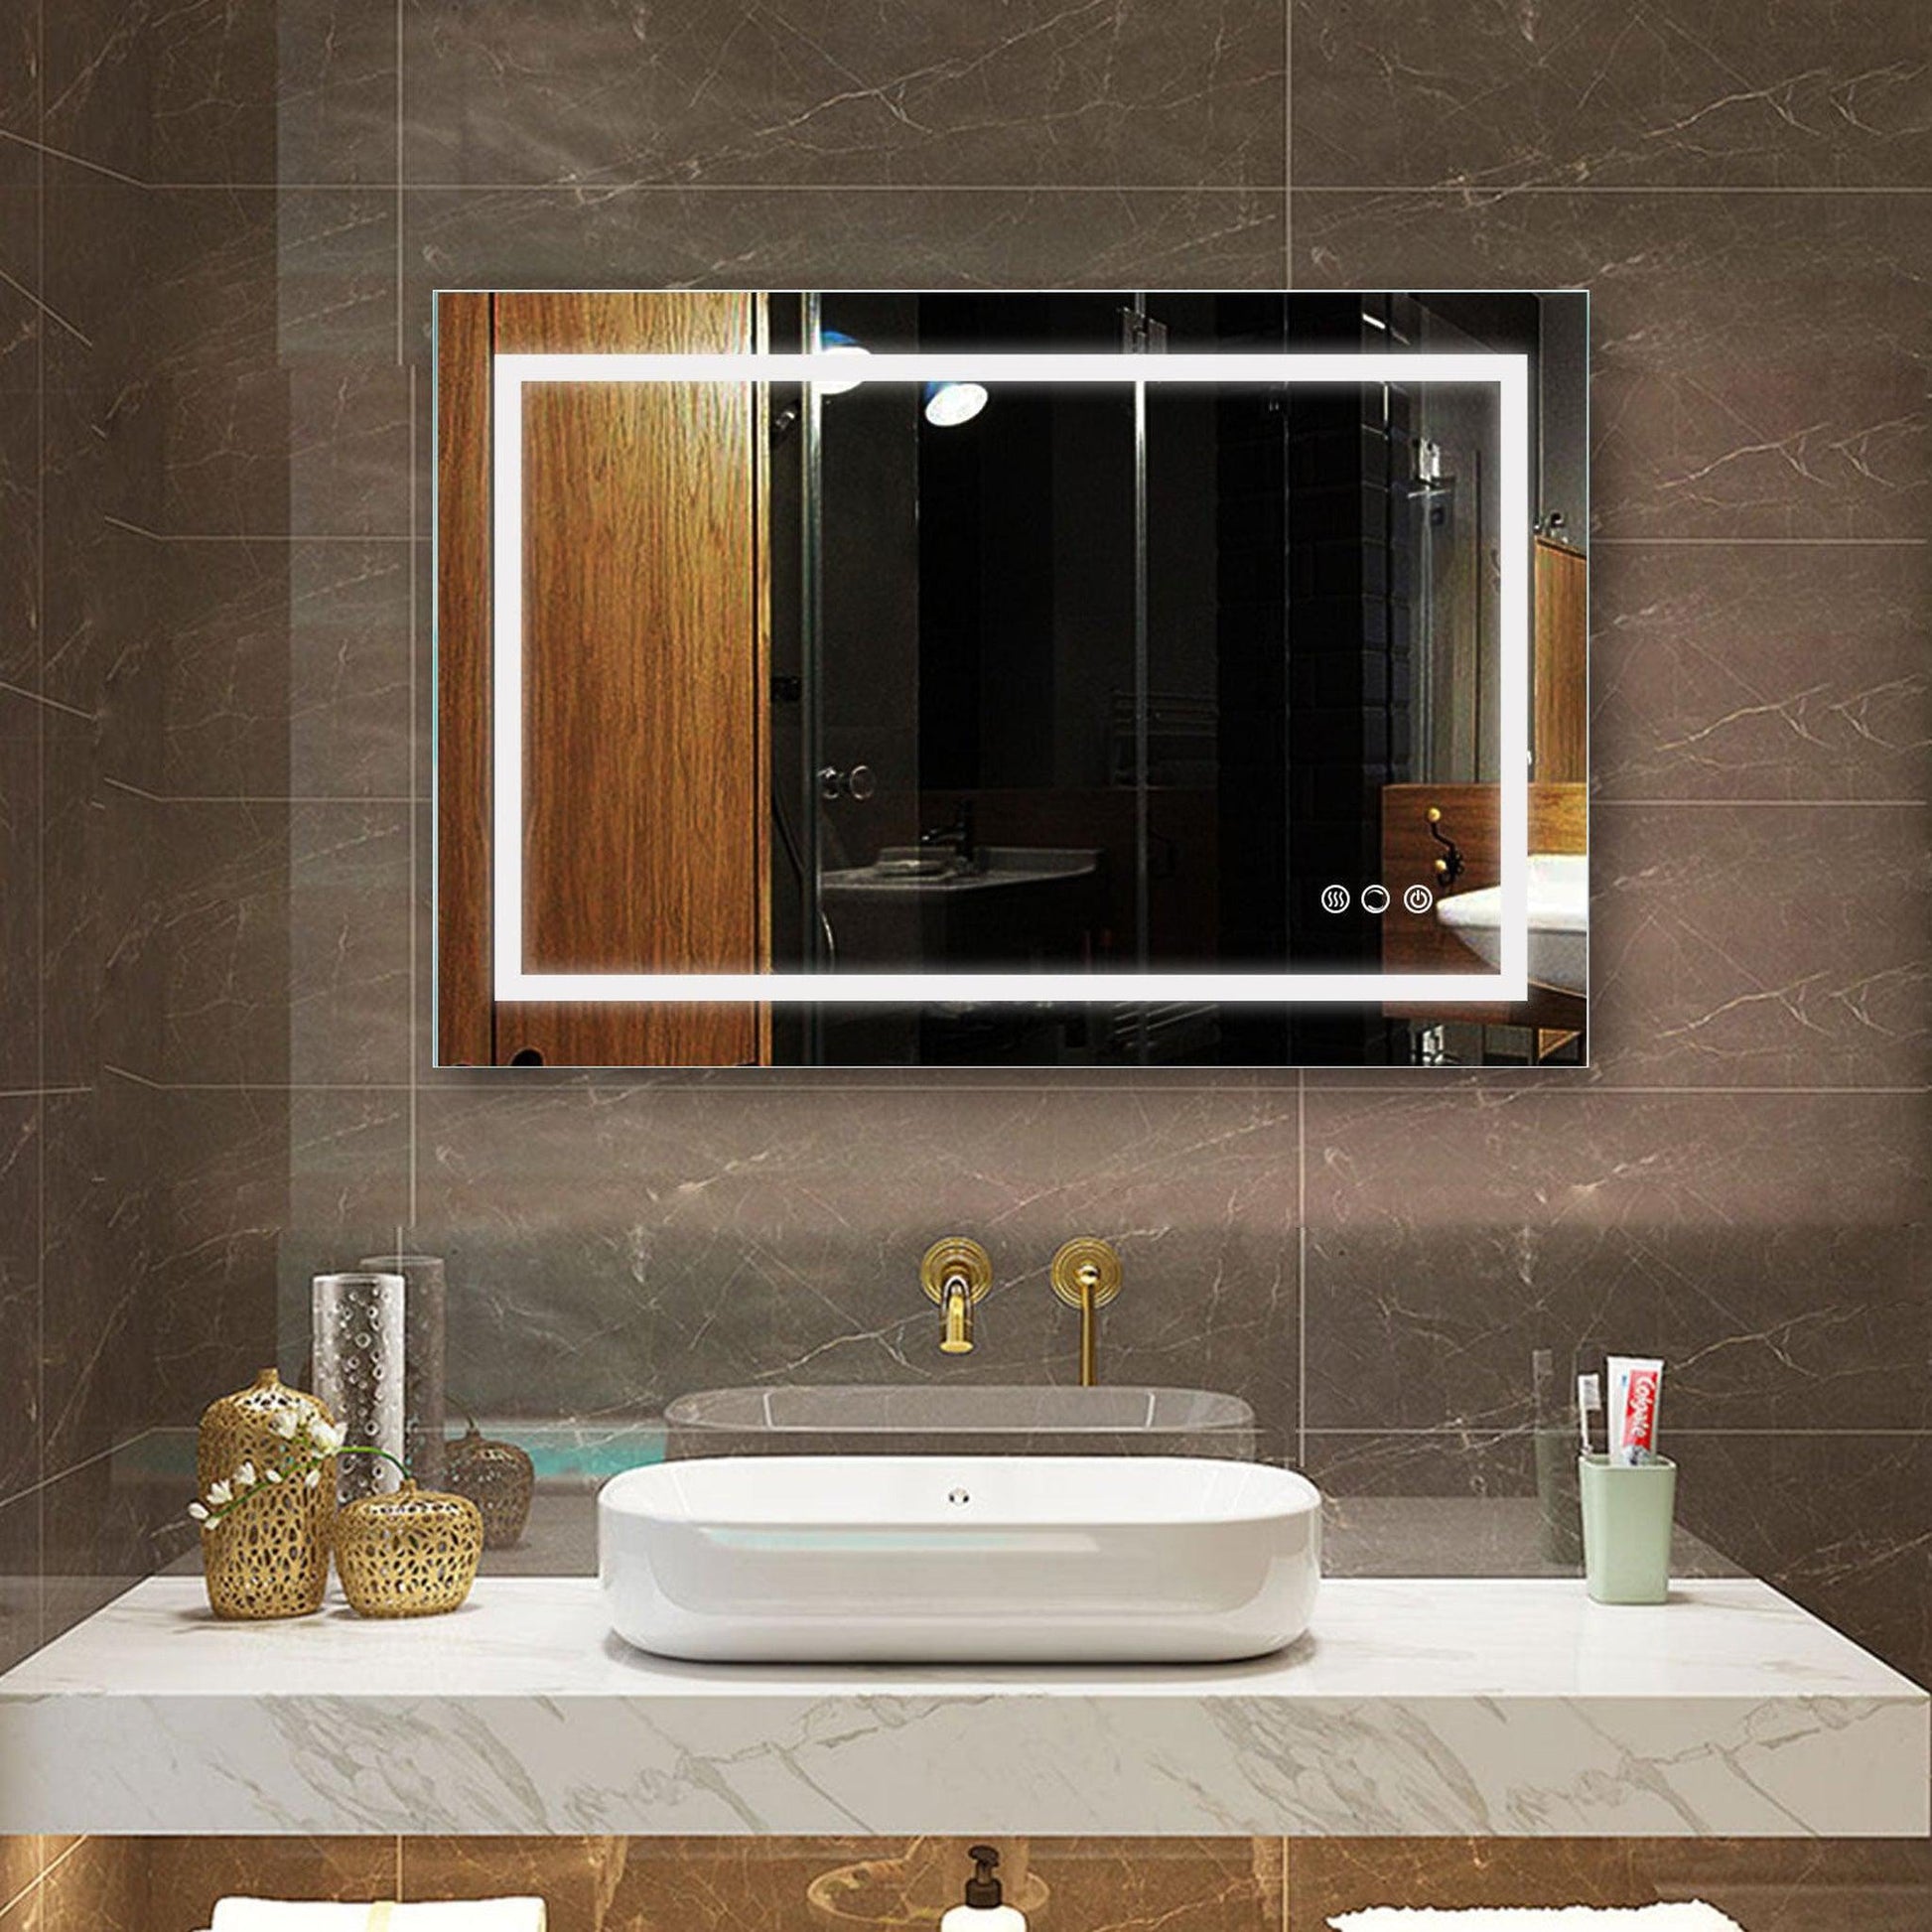 ExBrite Third Generation 40 x 24 Frameless Backlit LED Super Slim Bathroom Vanity Mirror with Clock, Night Light, Anti Fog, Dimmer, Touch Button and